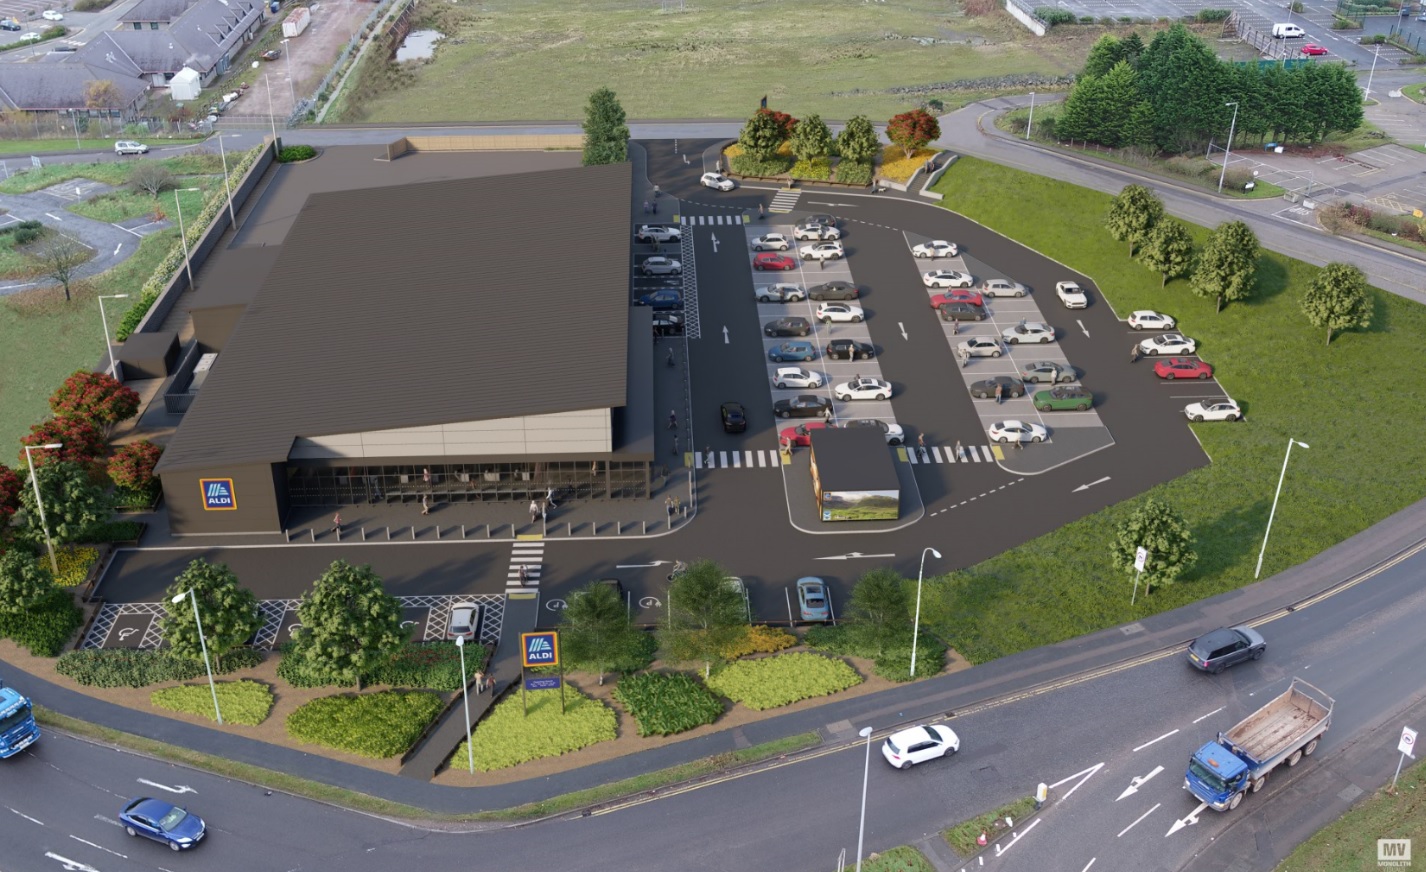 Aldi plans new stores in Aberdeen and Perth